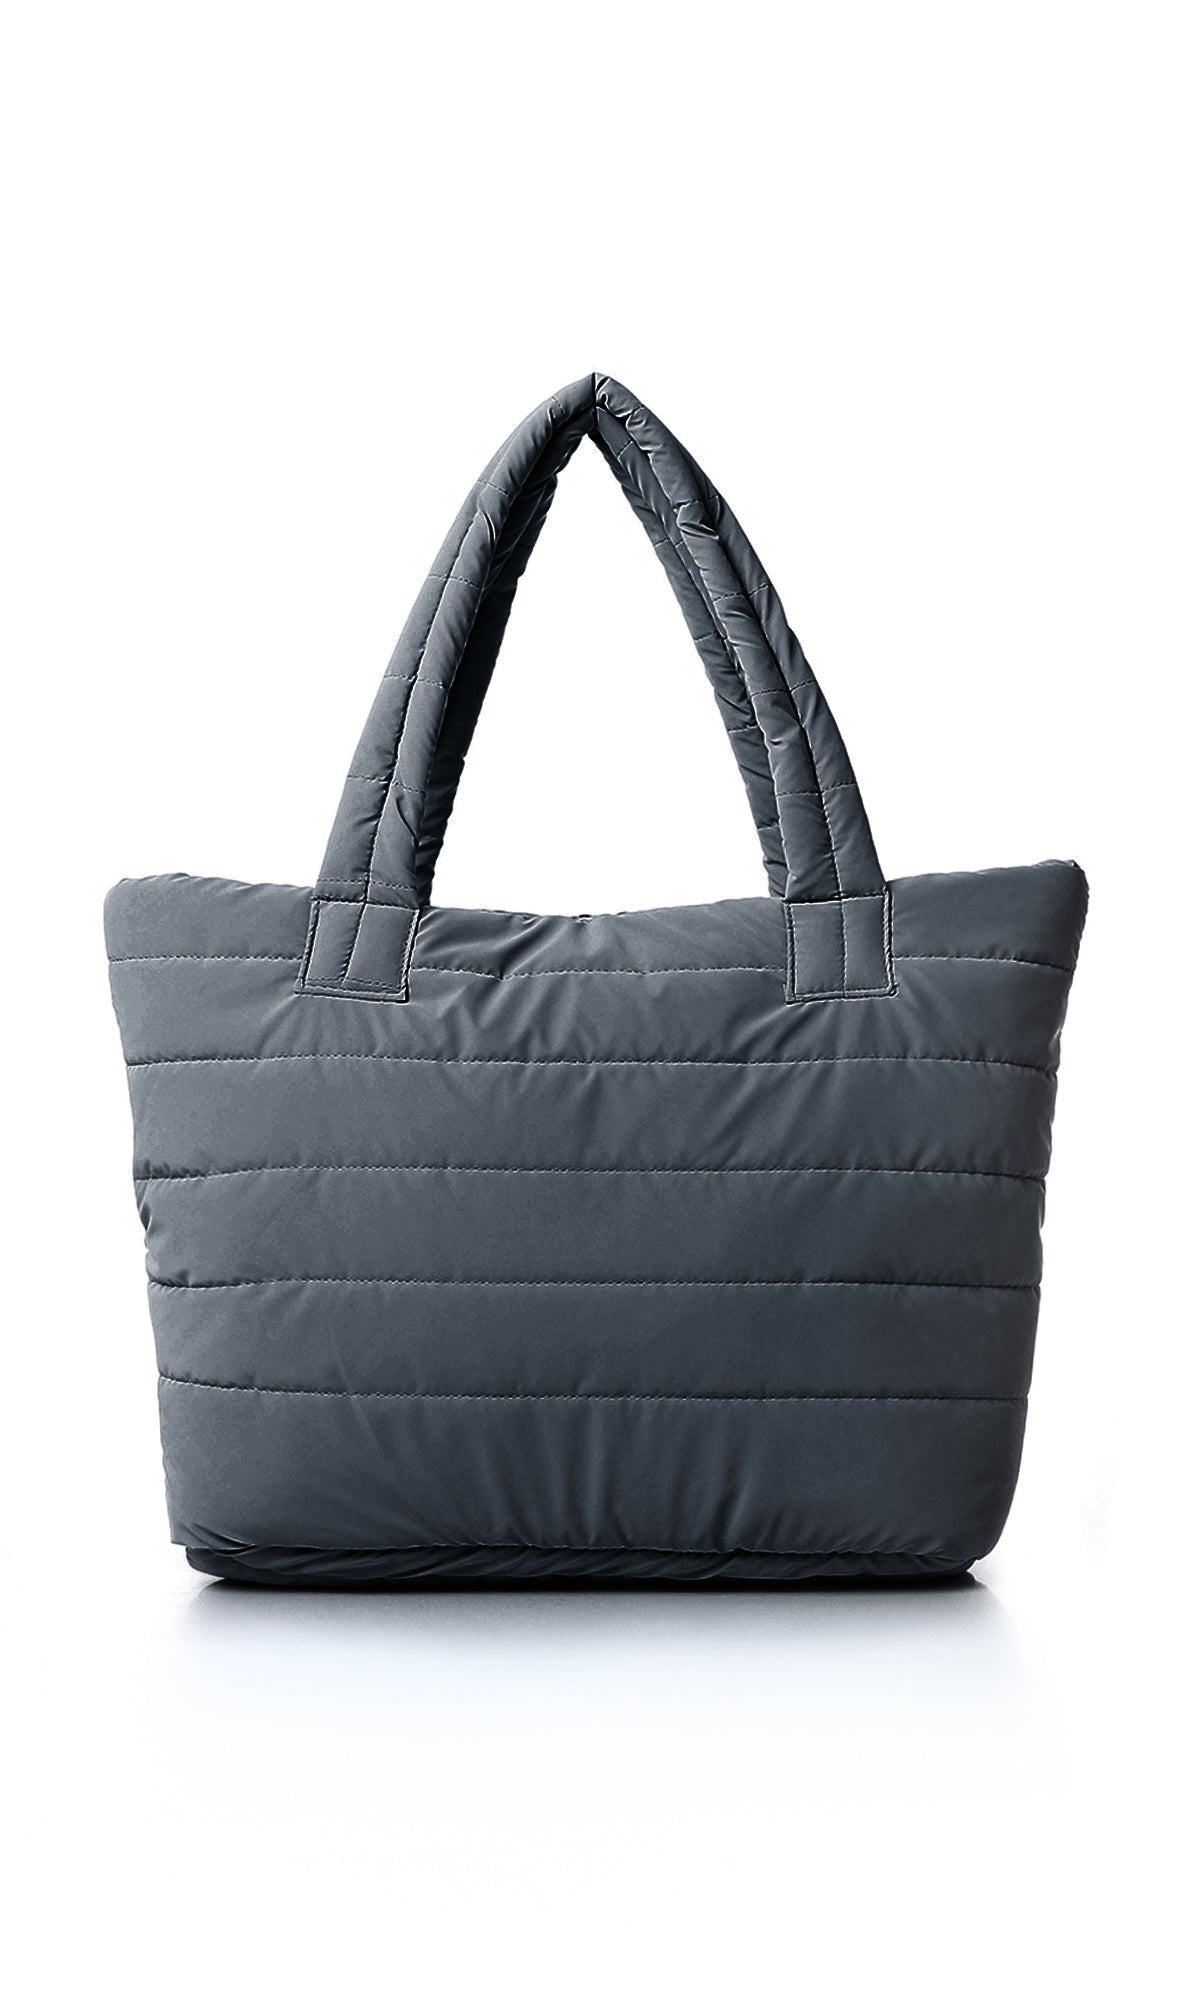 O181883 Zipped Casual Dark Grey Quilted Hand-Bag